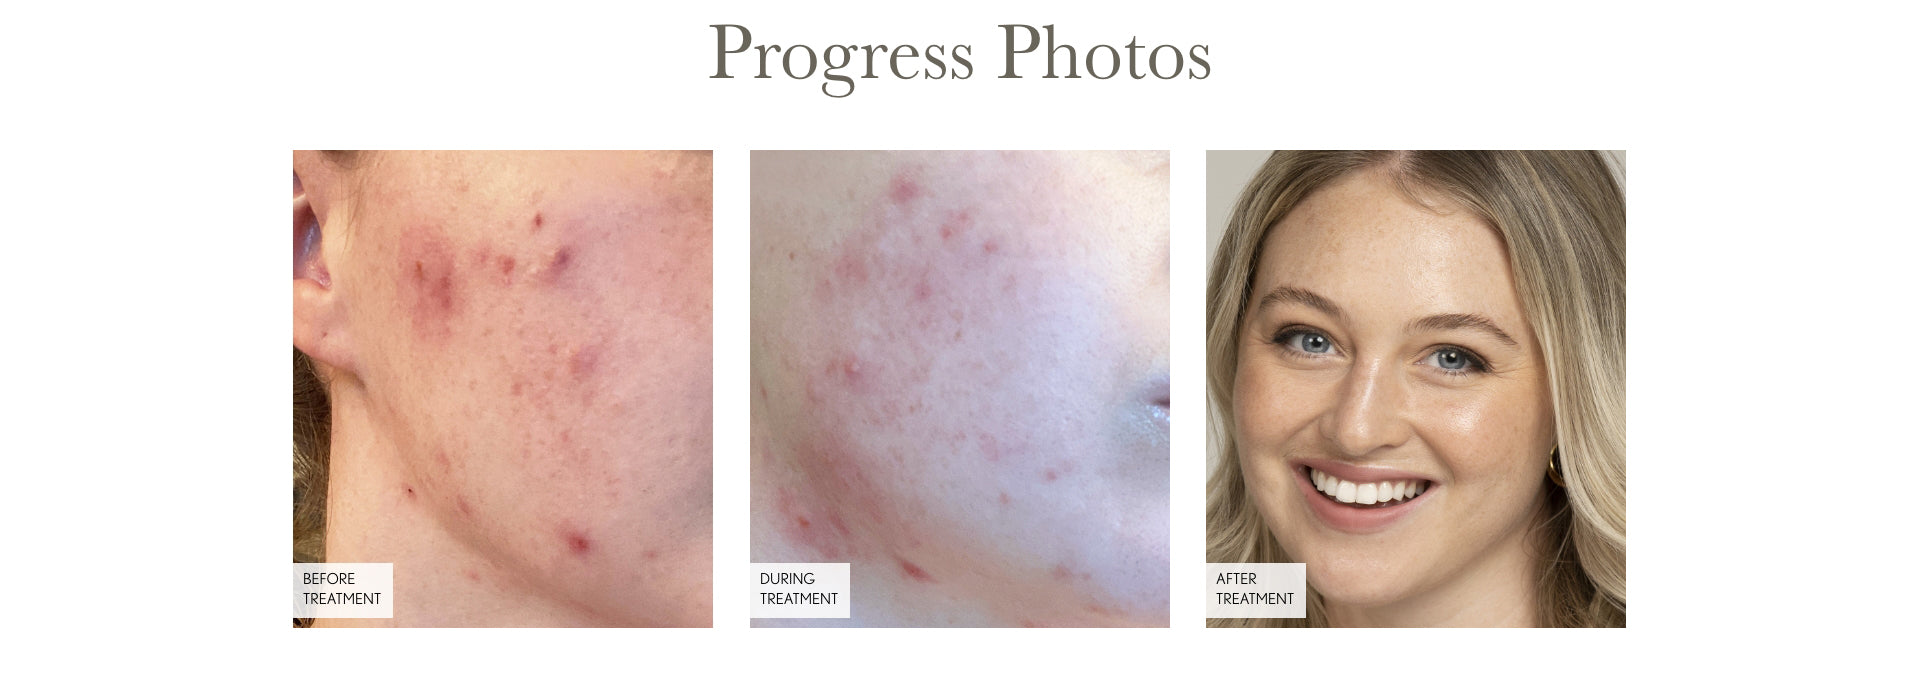 Progress Photos. A photo of Iskra's skin before Face Reality (moderate to severe inflamed acne), during treatment (moderate acne that is much less inflamed), and after treatment (clear skin, no blemishes). 